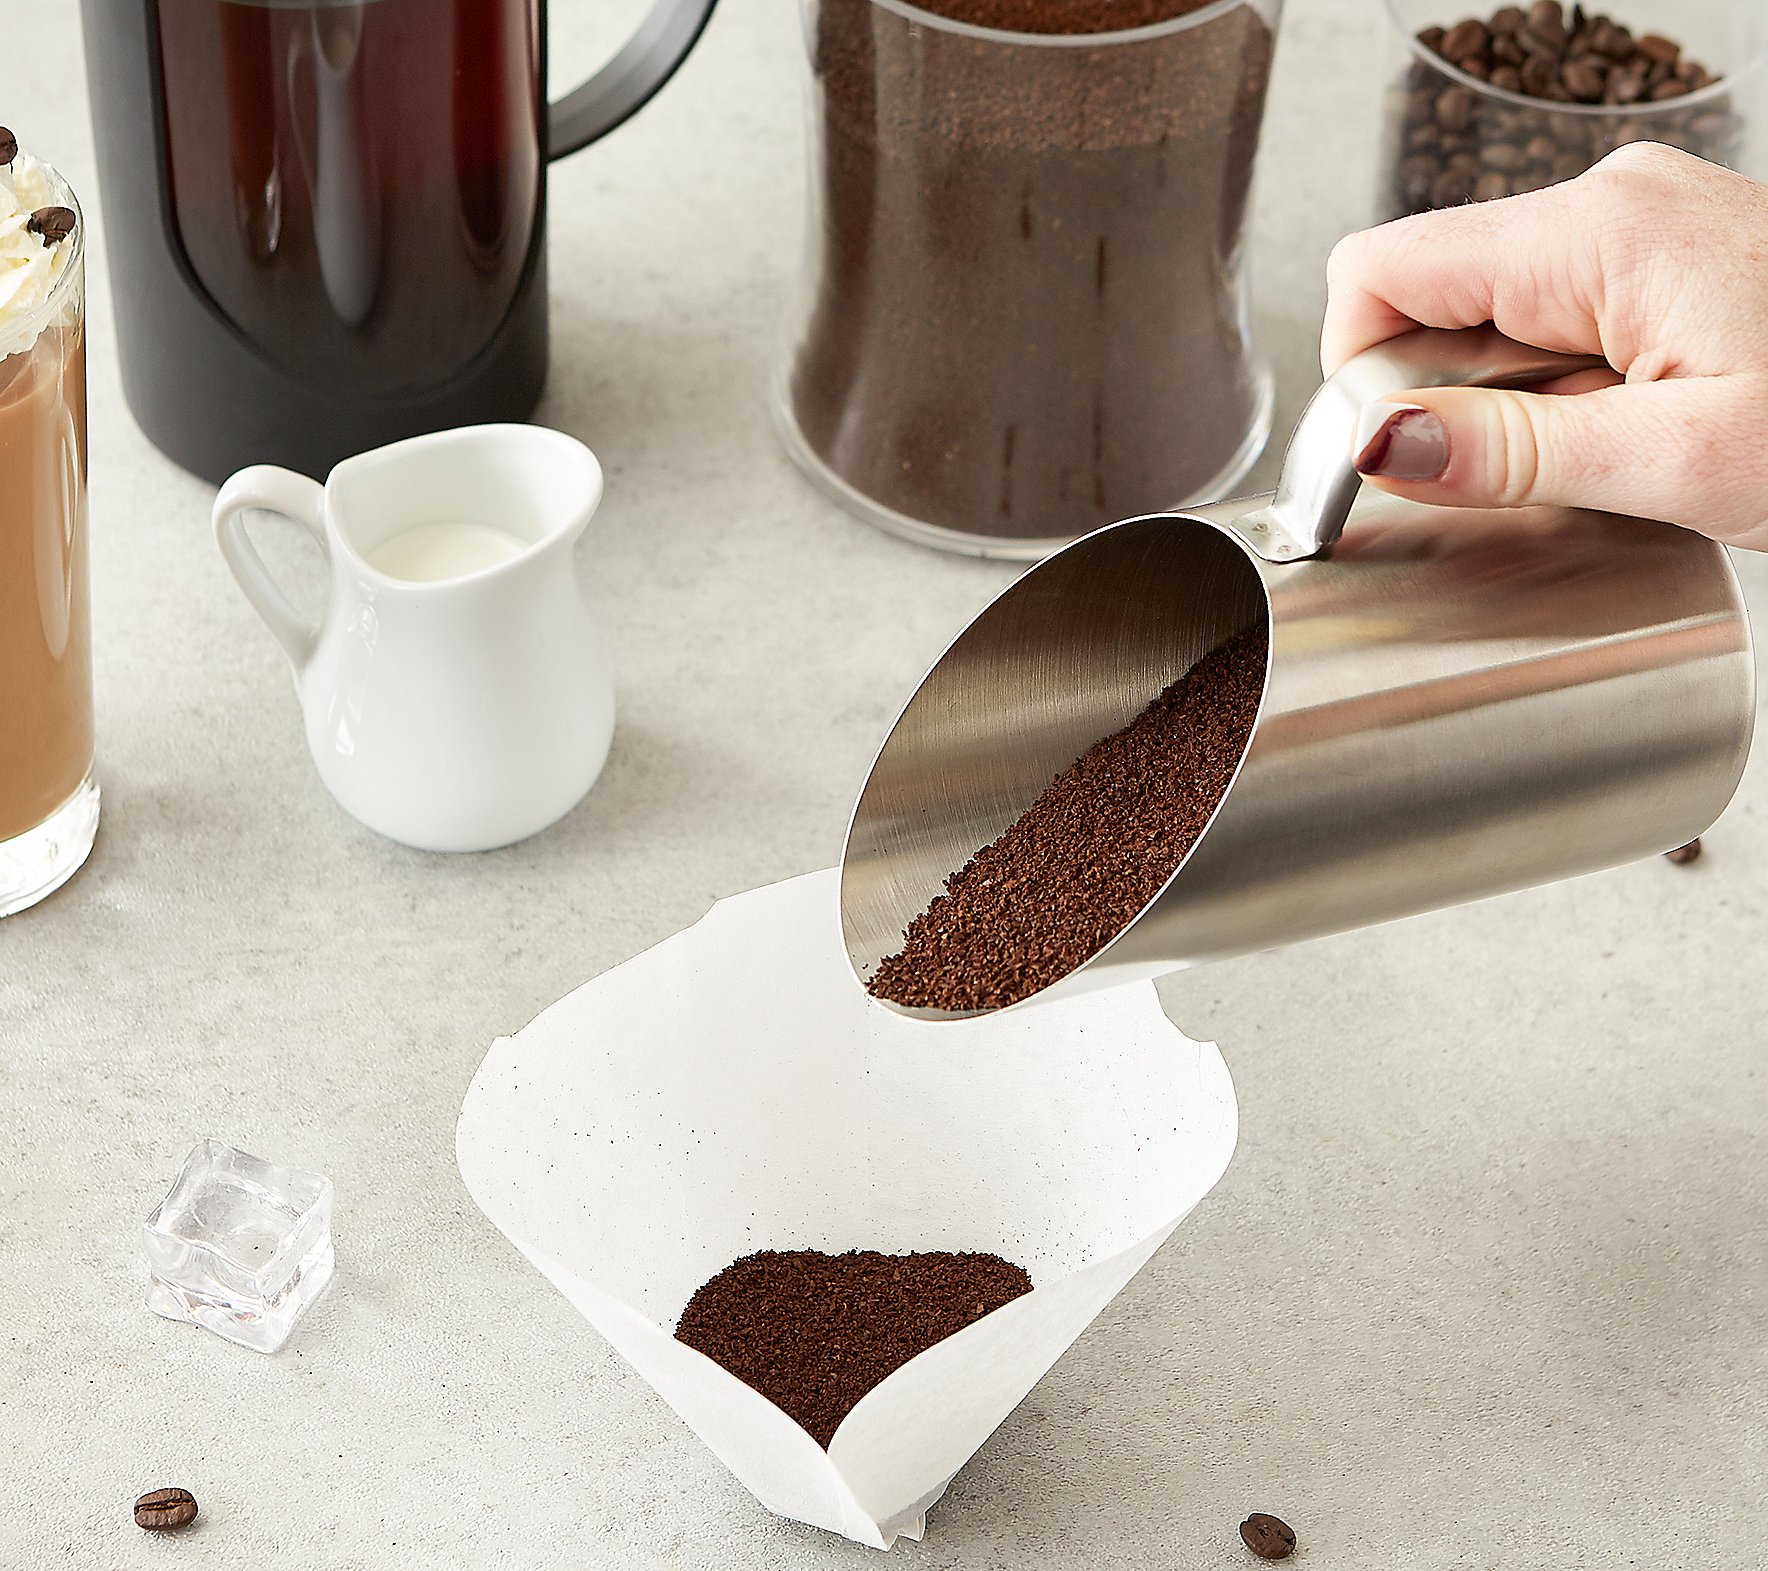 RSVP 1.5-Cup Scoop and Measure Cup